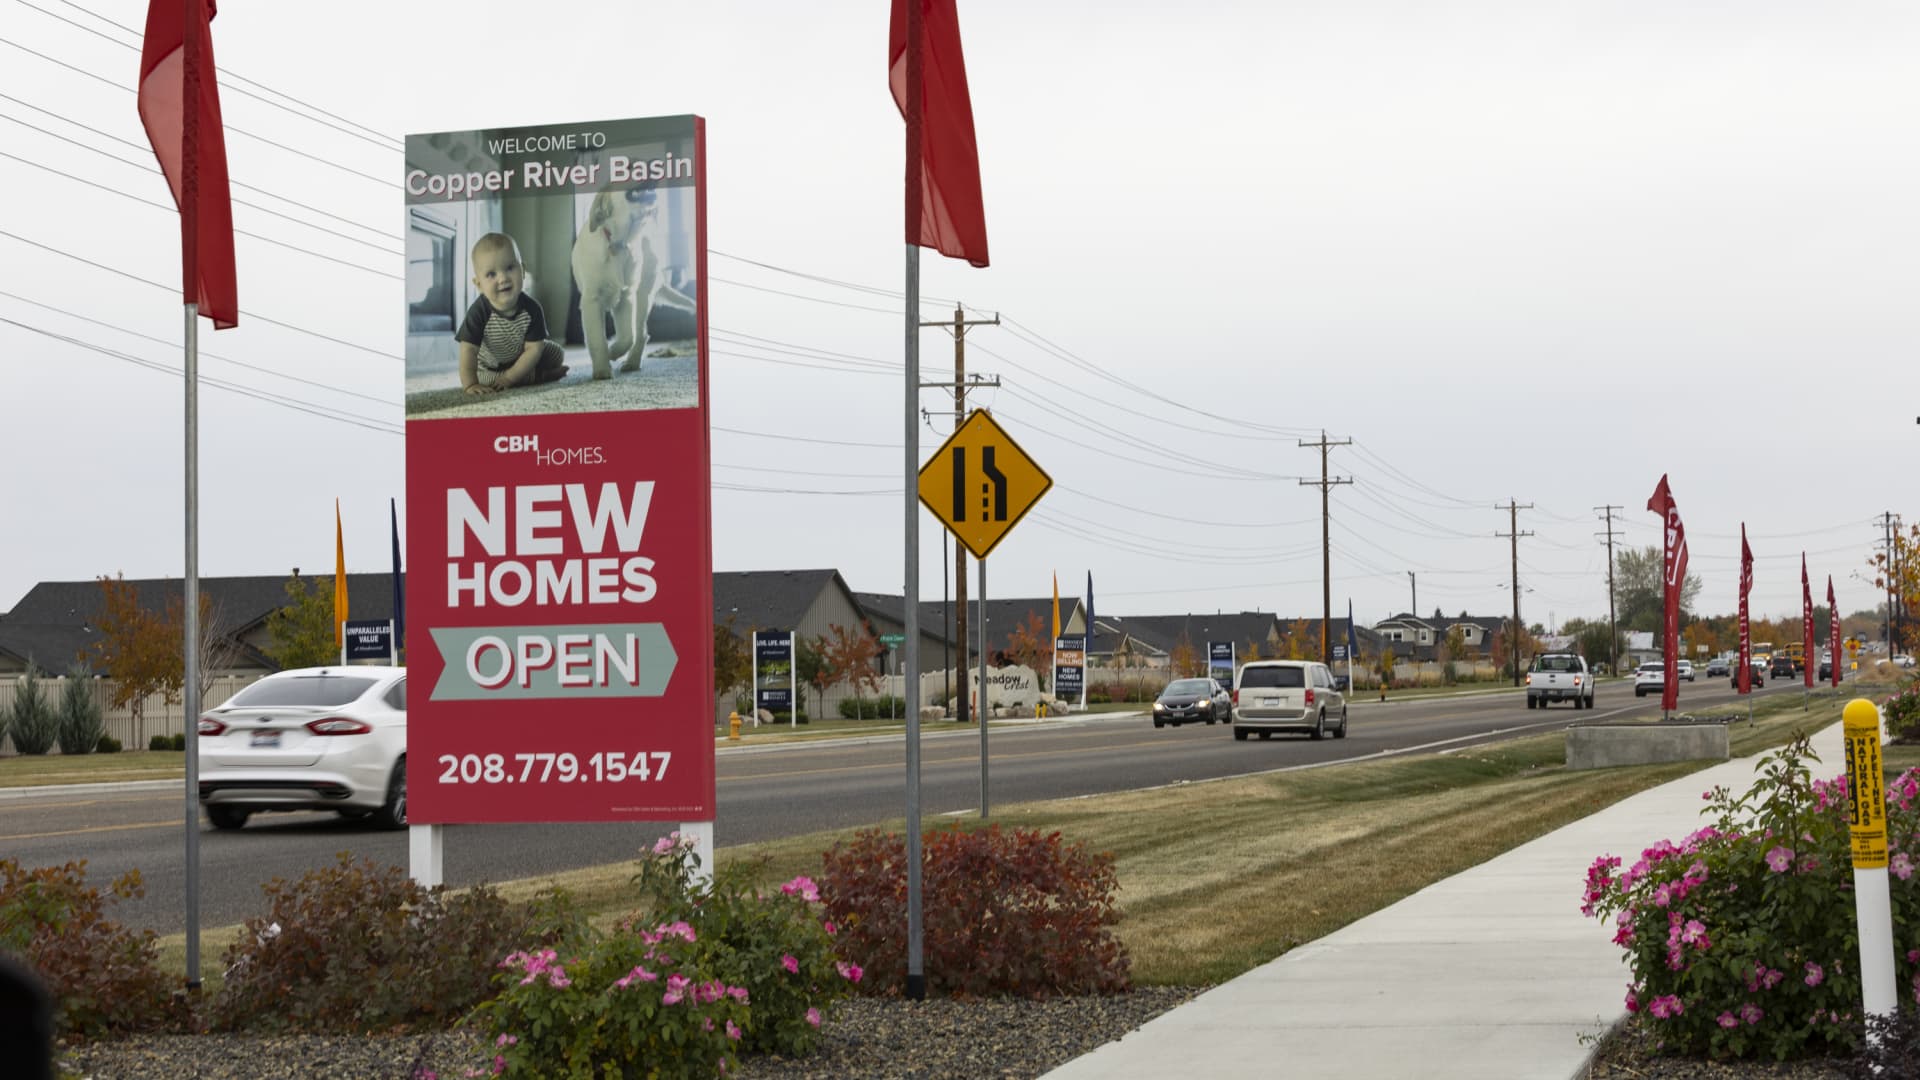 A 'New Homes' sign near the CBH Homes Copper River Basin Community in Nampa, Idaho, Oct. 19, 2021.